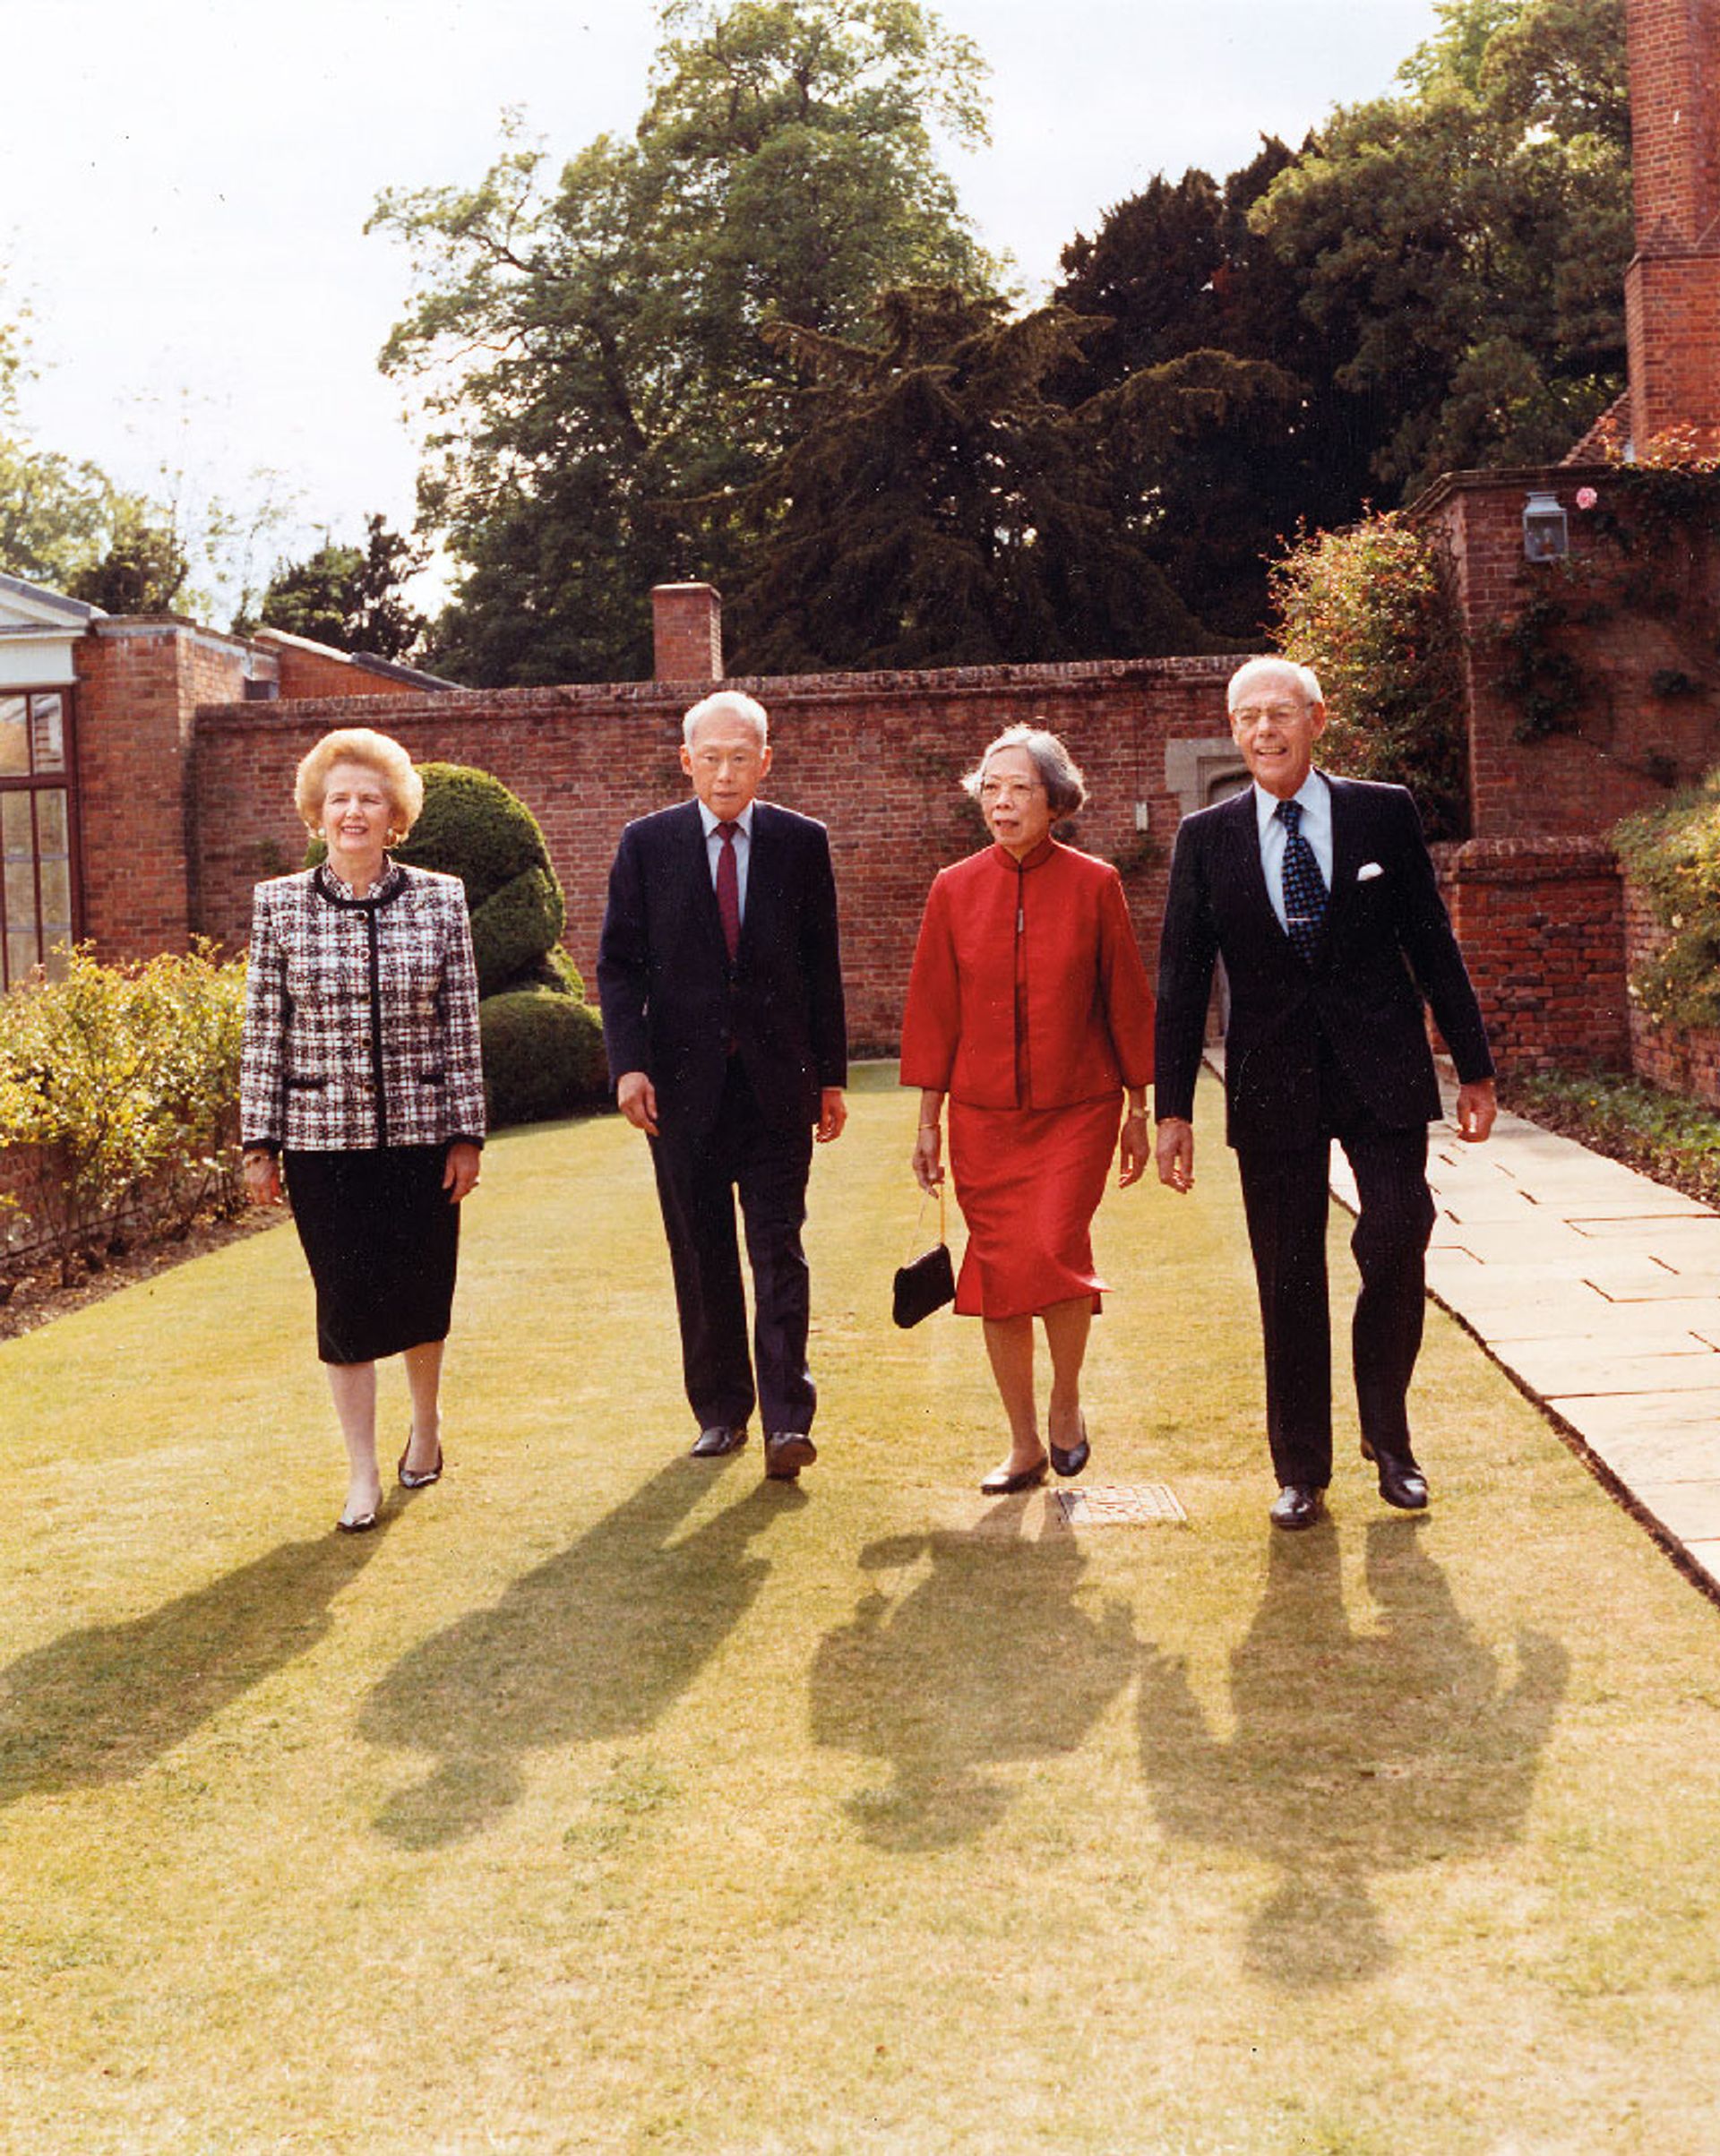 In England to meet good friend and British counterpart Margaret Thatcher in 1990, Mr Lee, accompanied by Mrs Lee, saw the Iron Lady and her husband Denis at her official country retreat, Chequers, before both stepped down from premiership later that year. Source: Lee Kuan Yew